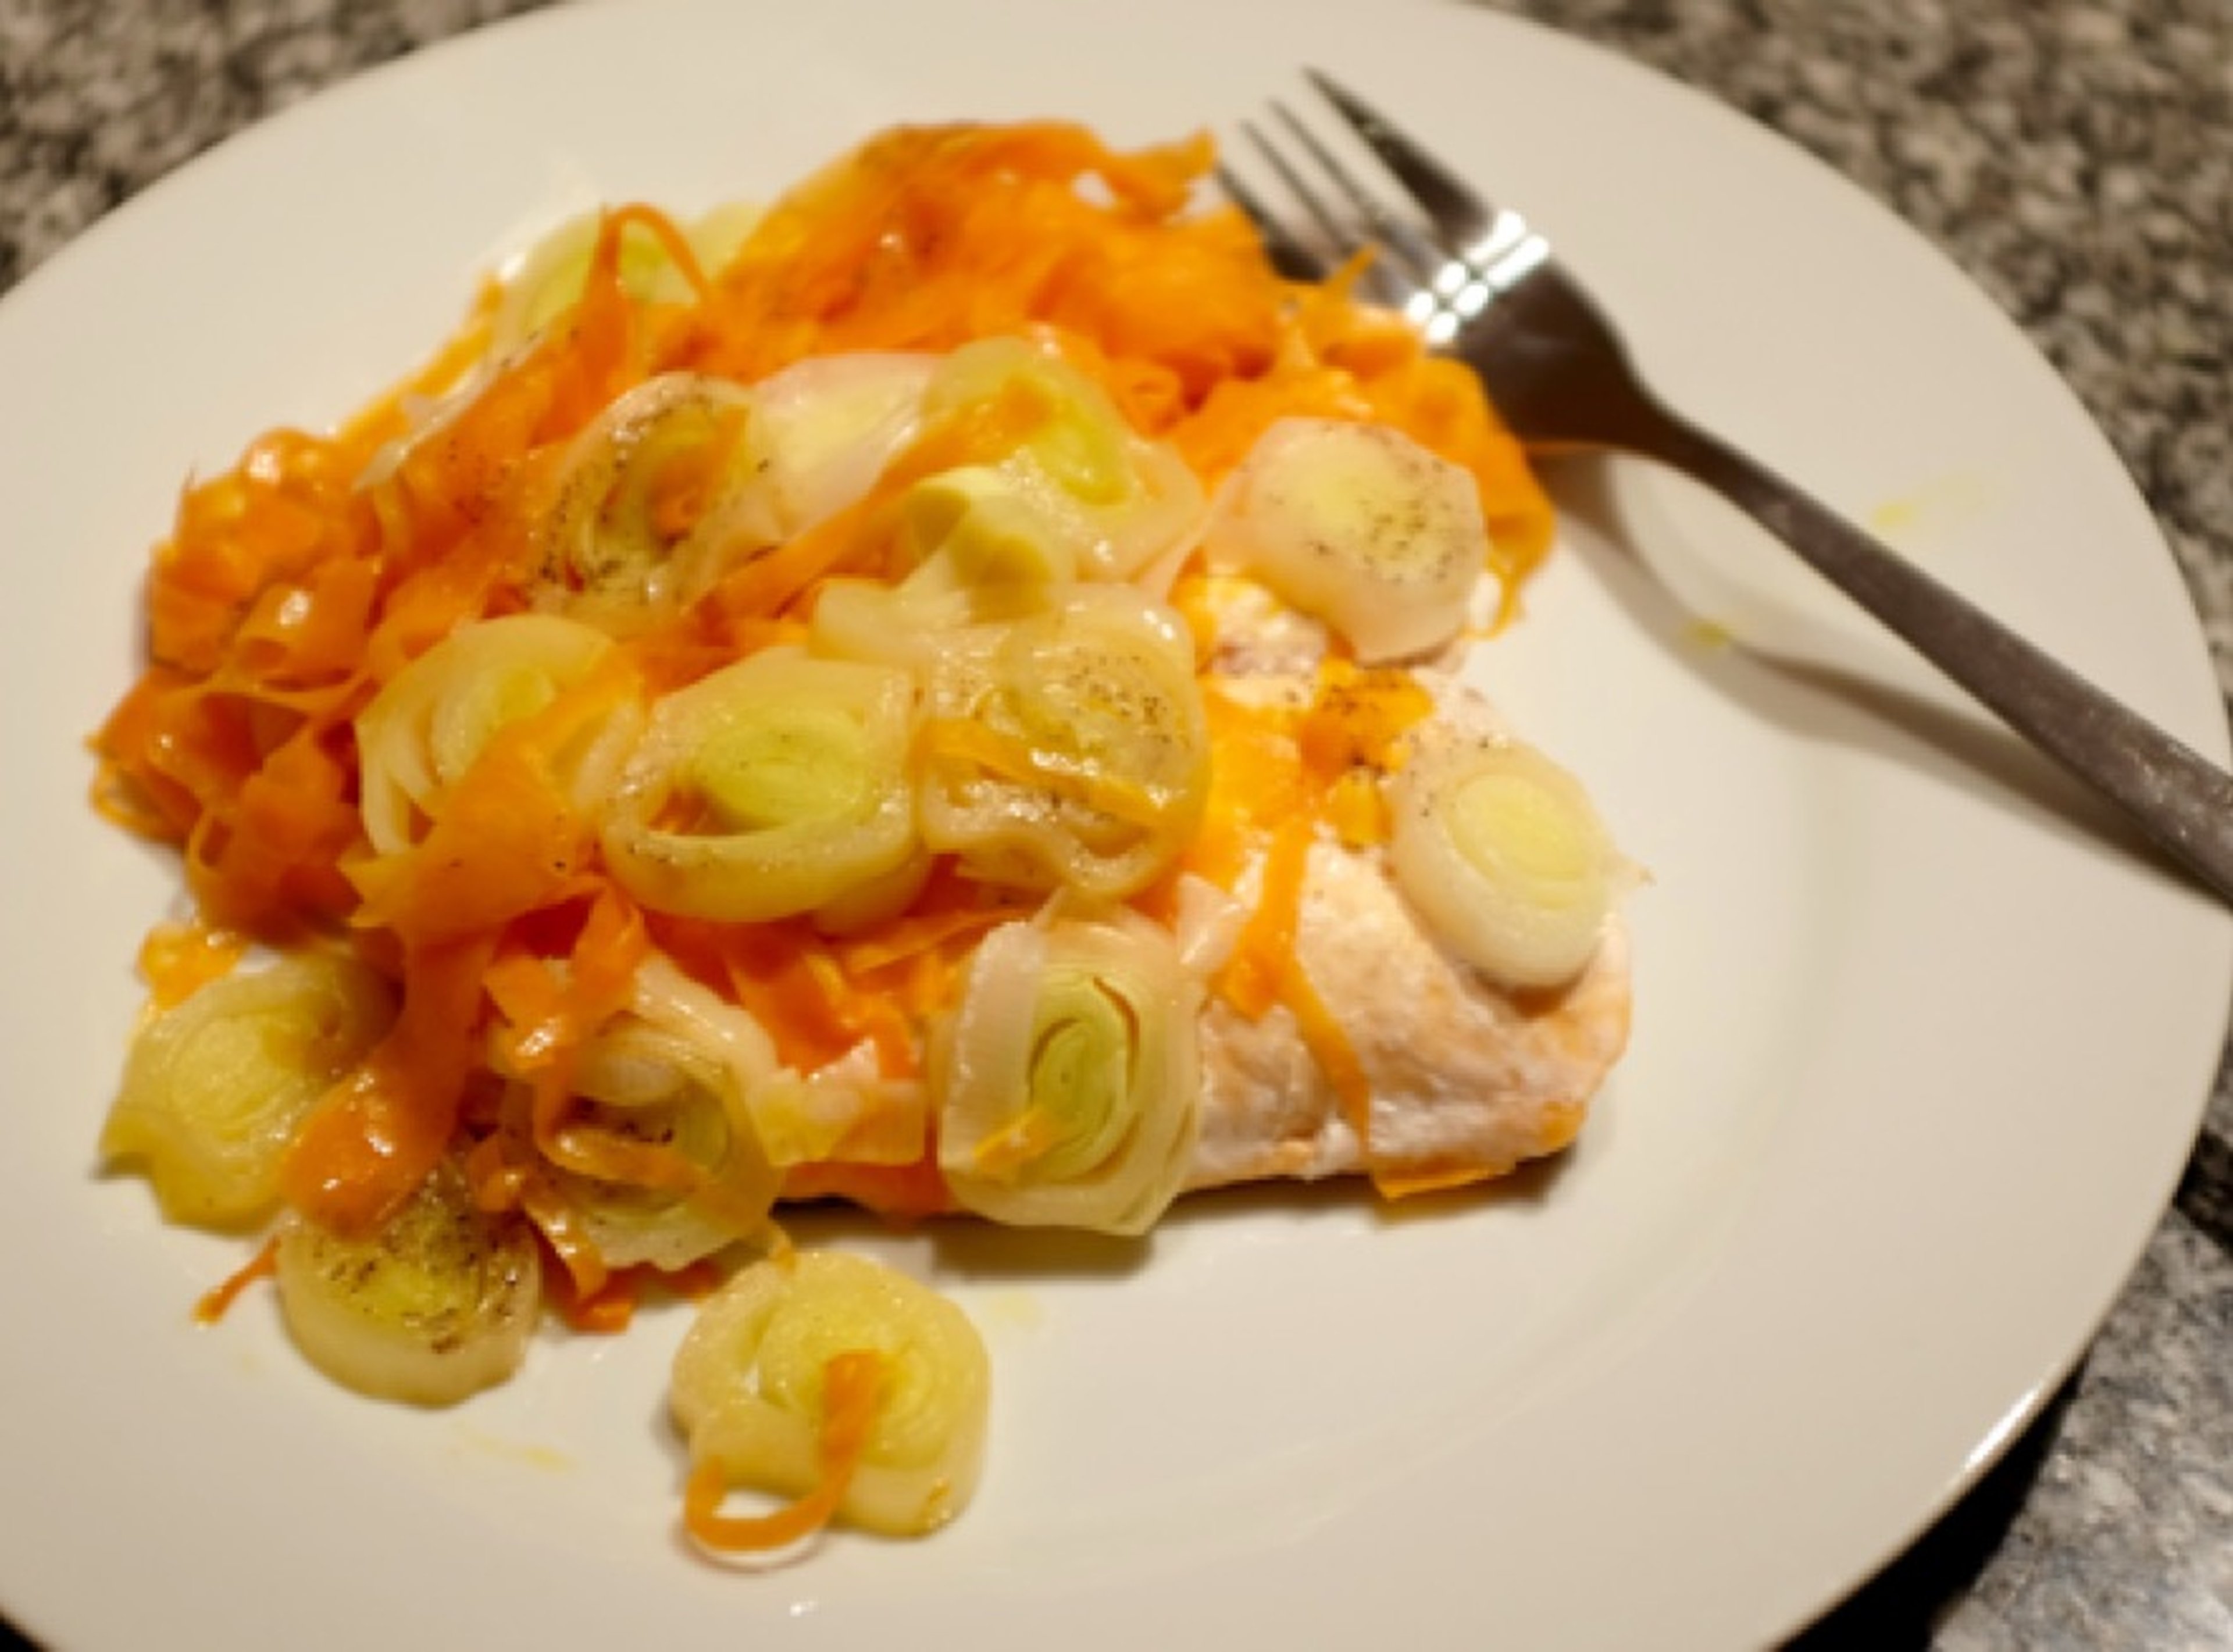 Baked salmon with carrots and leek